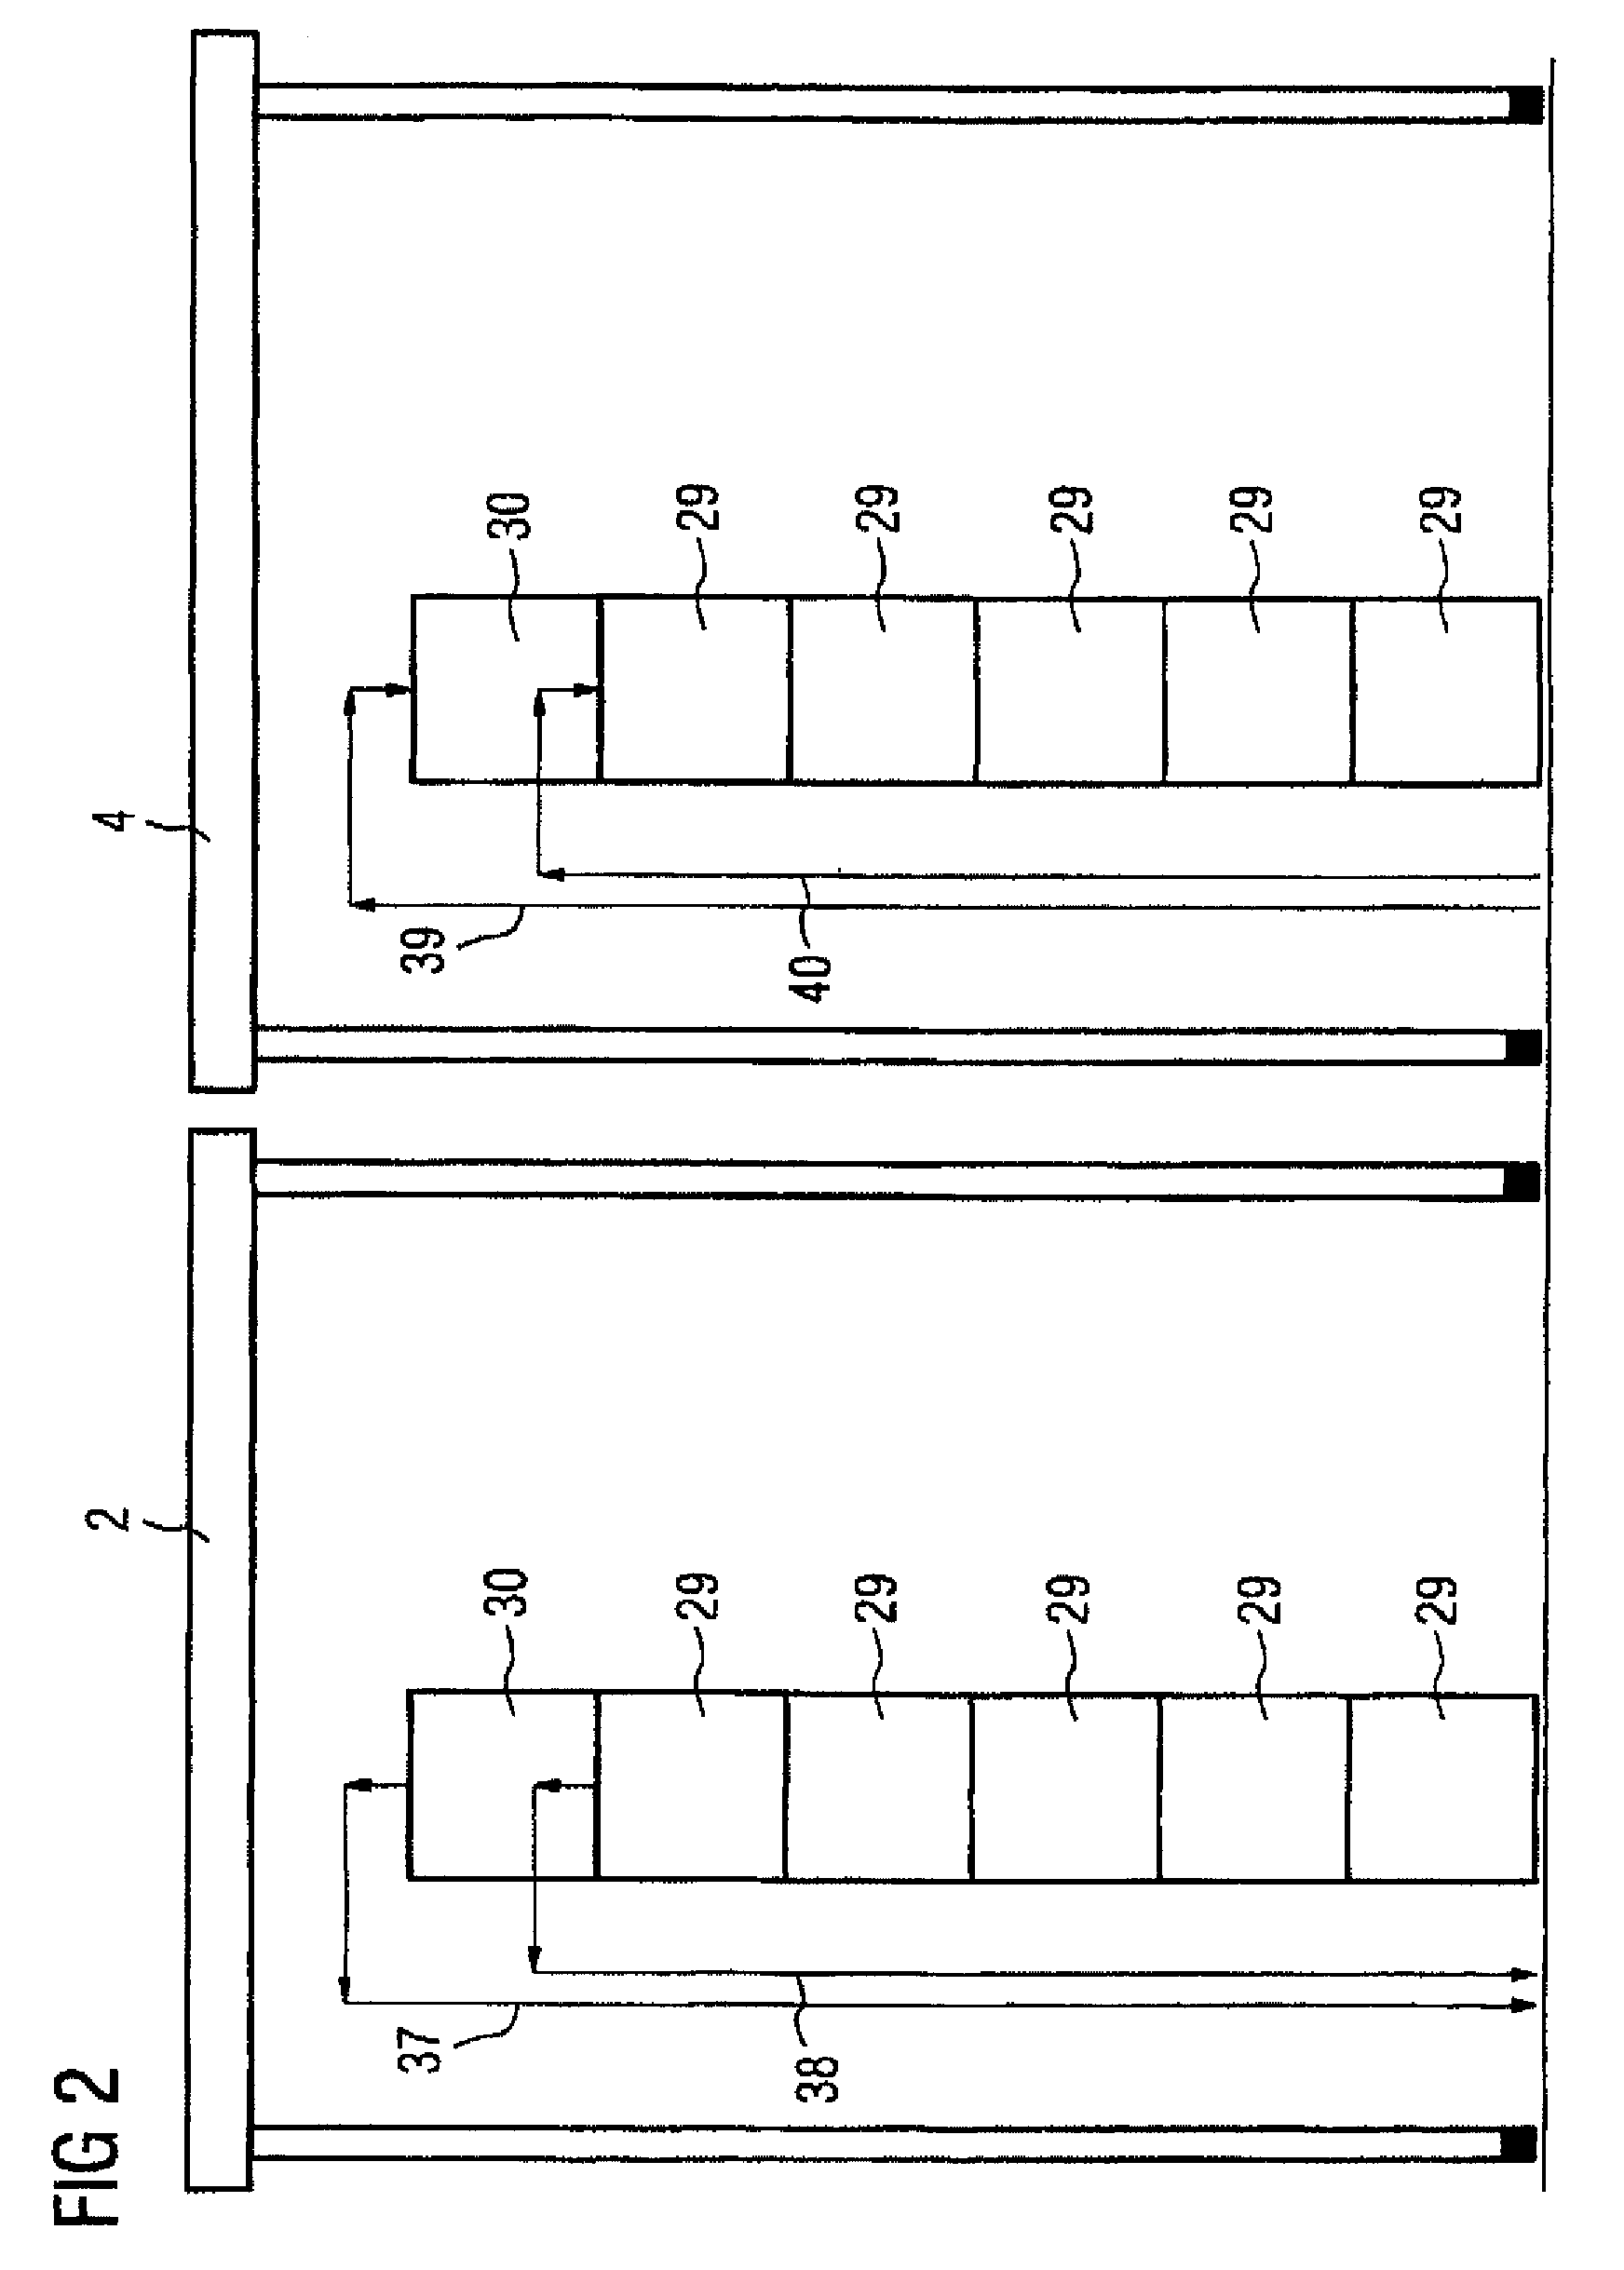 System and method for predictive management of energy supply to a transport device